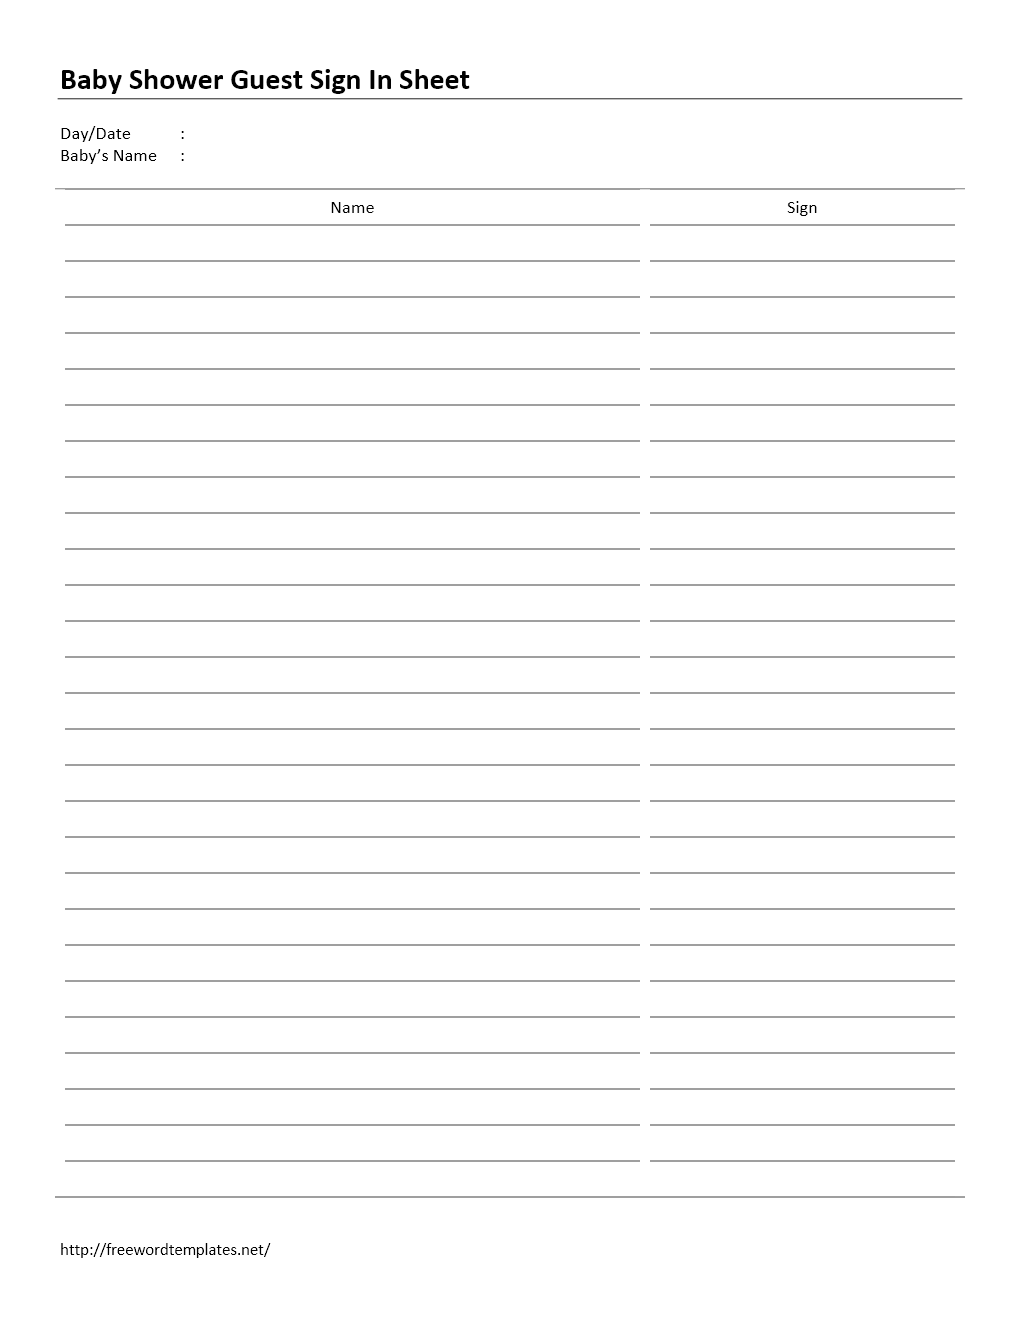 baby-shower-guest-sign-in-sheet